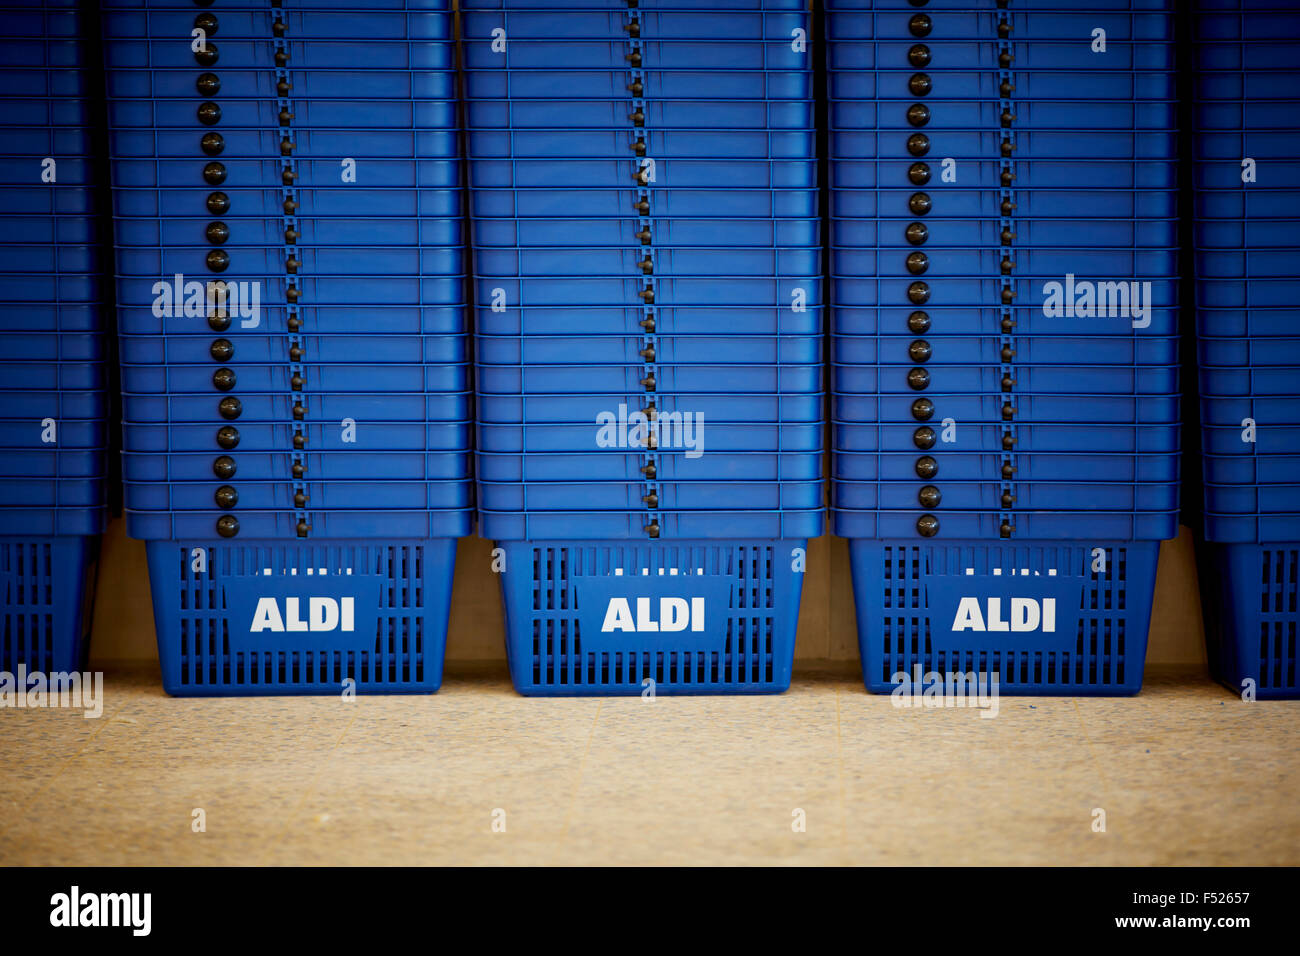 Aldi discount supermarket plastic hand baskets in blue   stacked rows many ready leading global discount supermarket chain Shops Stock Photo